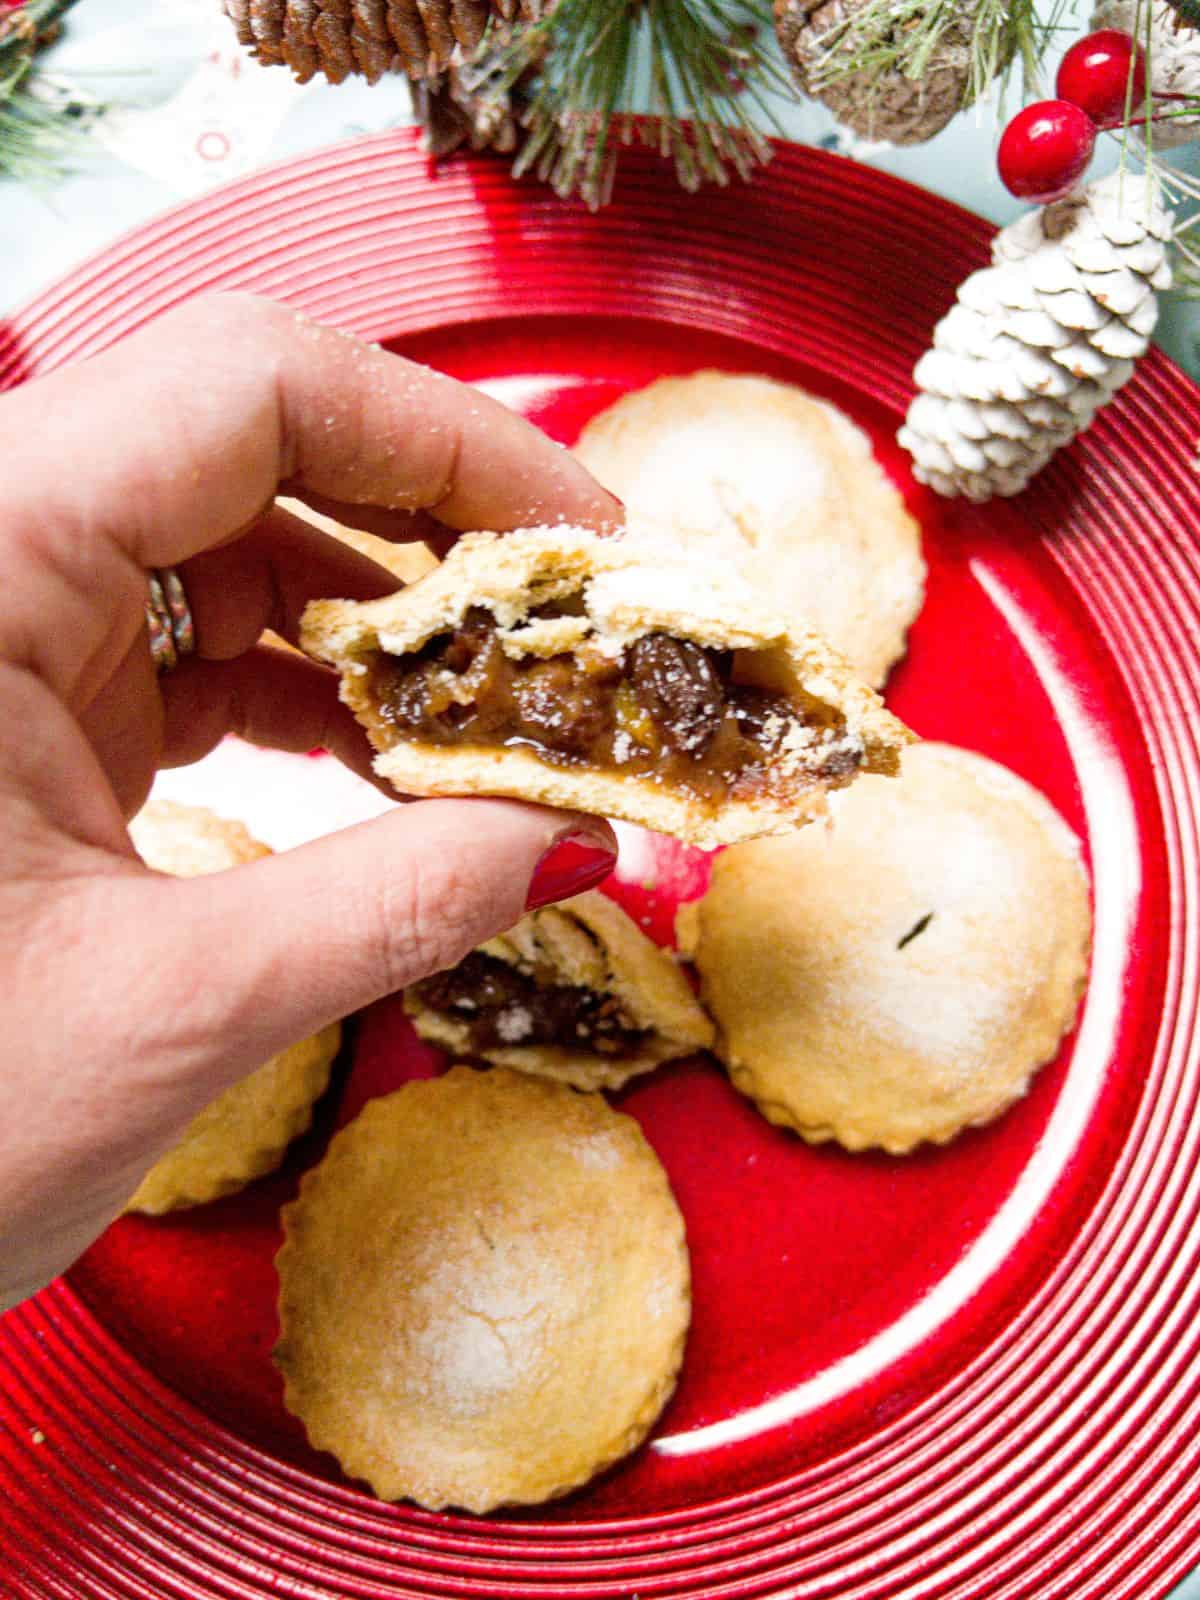 mince pies on a plate with one cut in half & being held so you can see the mincemeat inside.